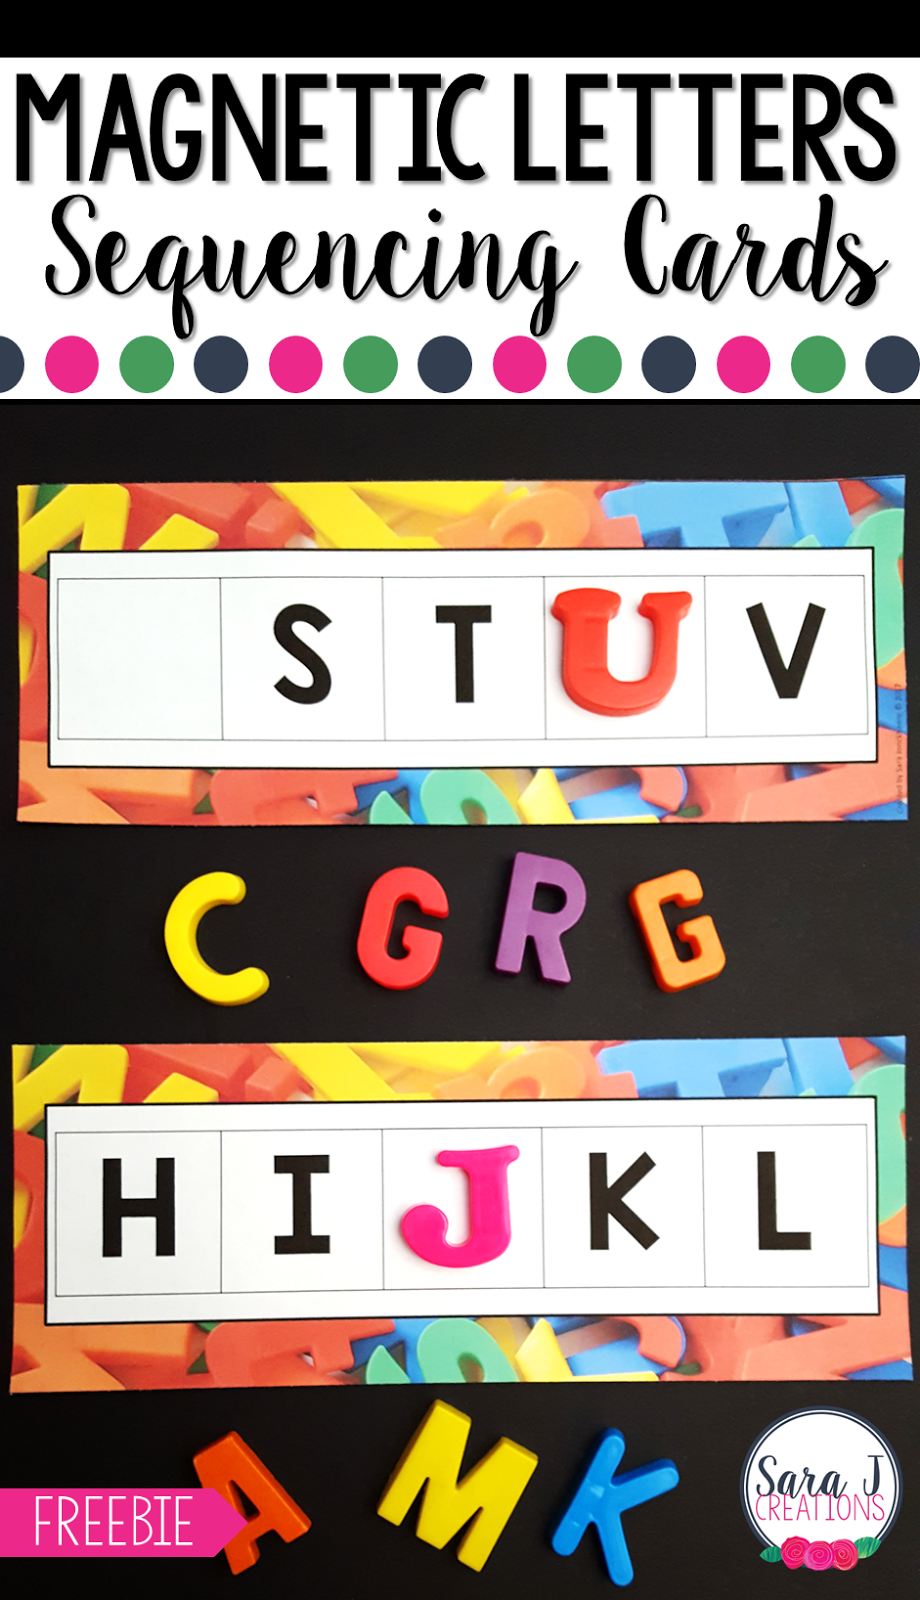 Free alphabet sequencing cards to use with magnetic letters. Also check out all of the other magnetic letter freebies at the bottom. #sarajcreations #magneticletters #alphabet #kindergarten